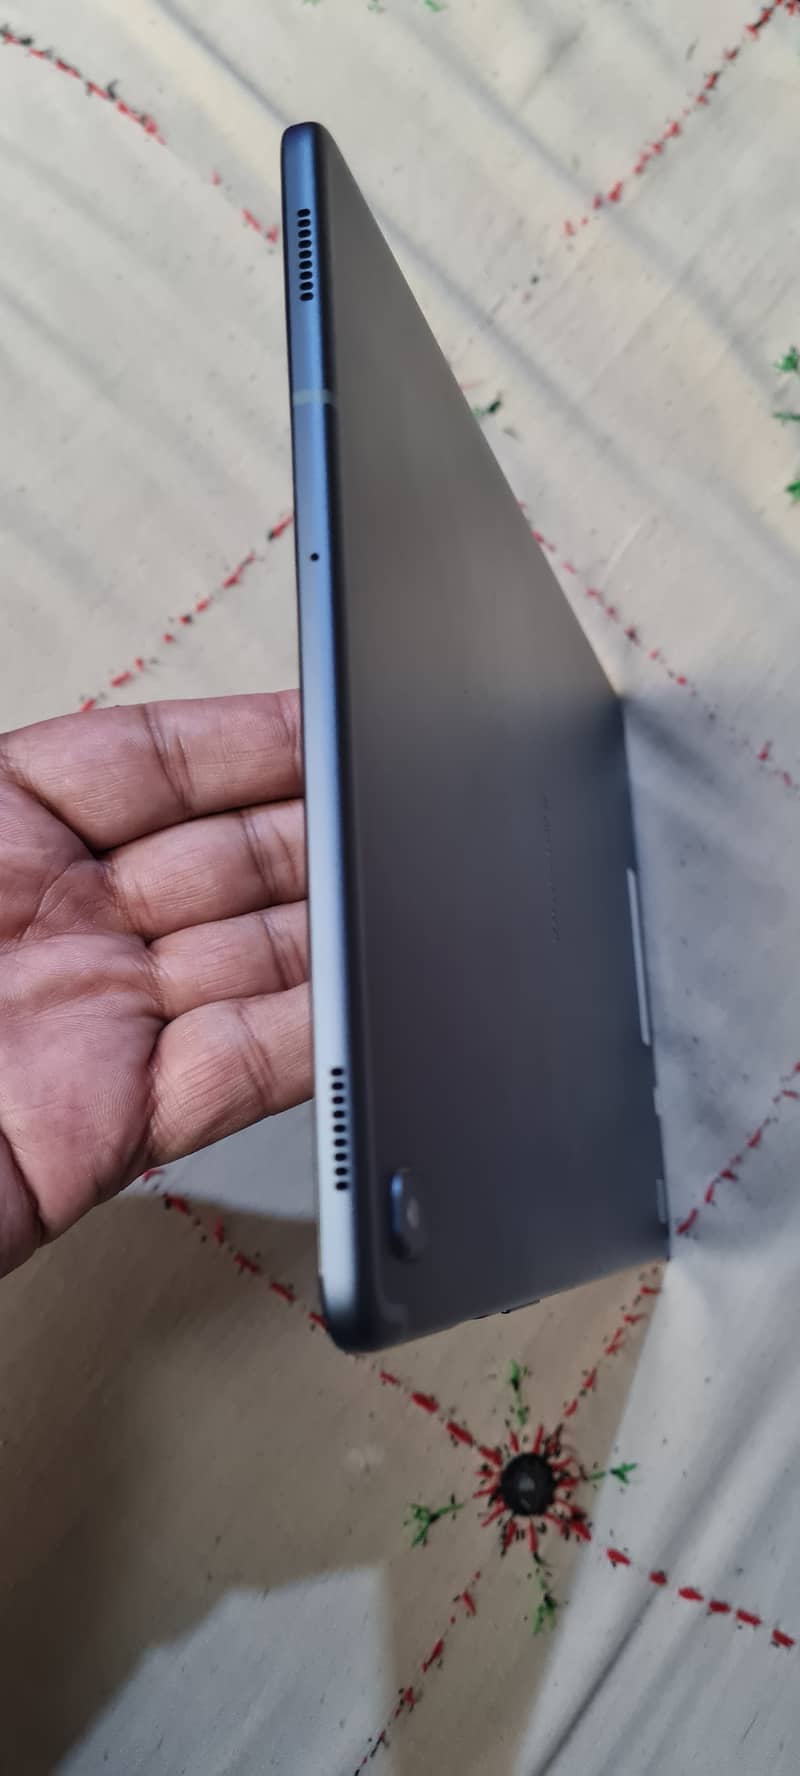 Samsung flagship tab S5e. . 10 by 10 condition 9